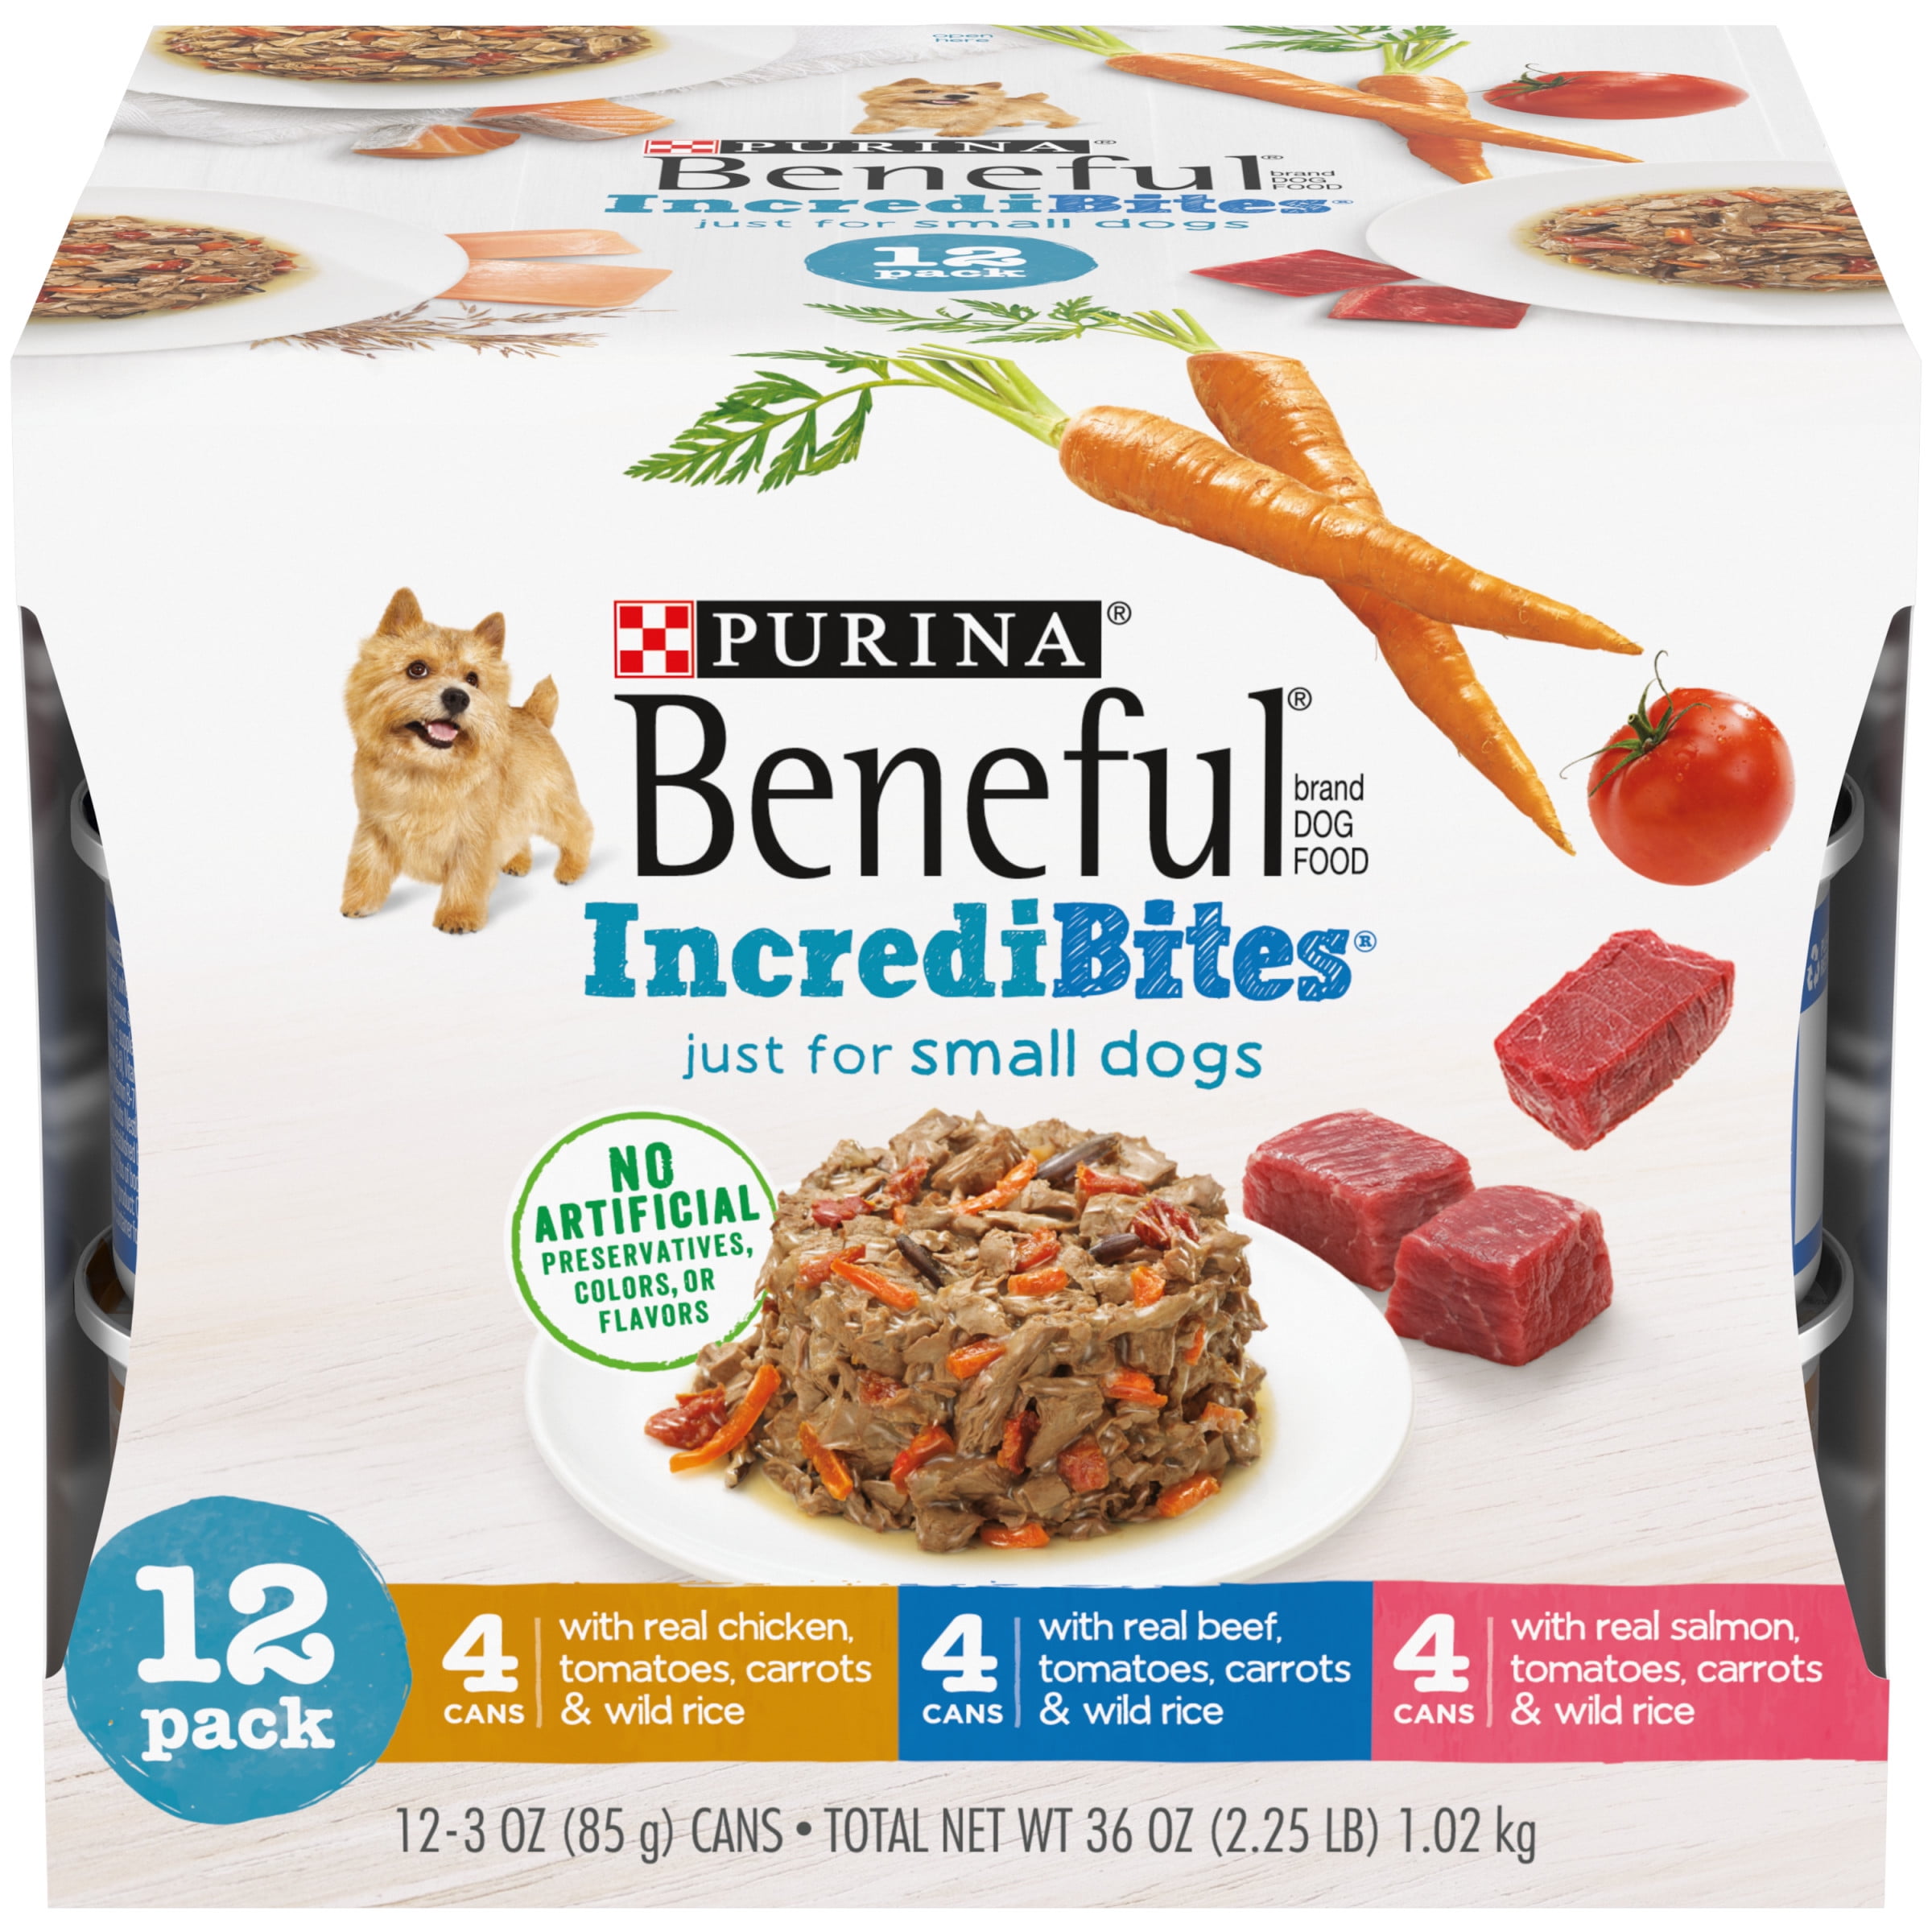 Purina Beneful Incredibites Wet Dog Food for Small Dogs Chicken Beef, 3 oz Cans (12 Pack)